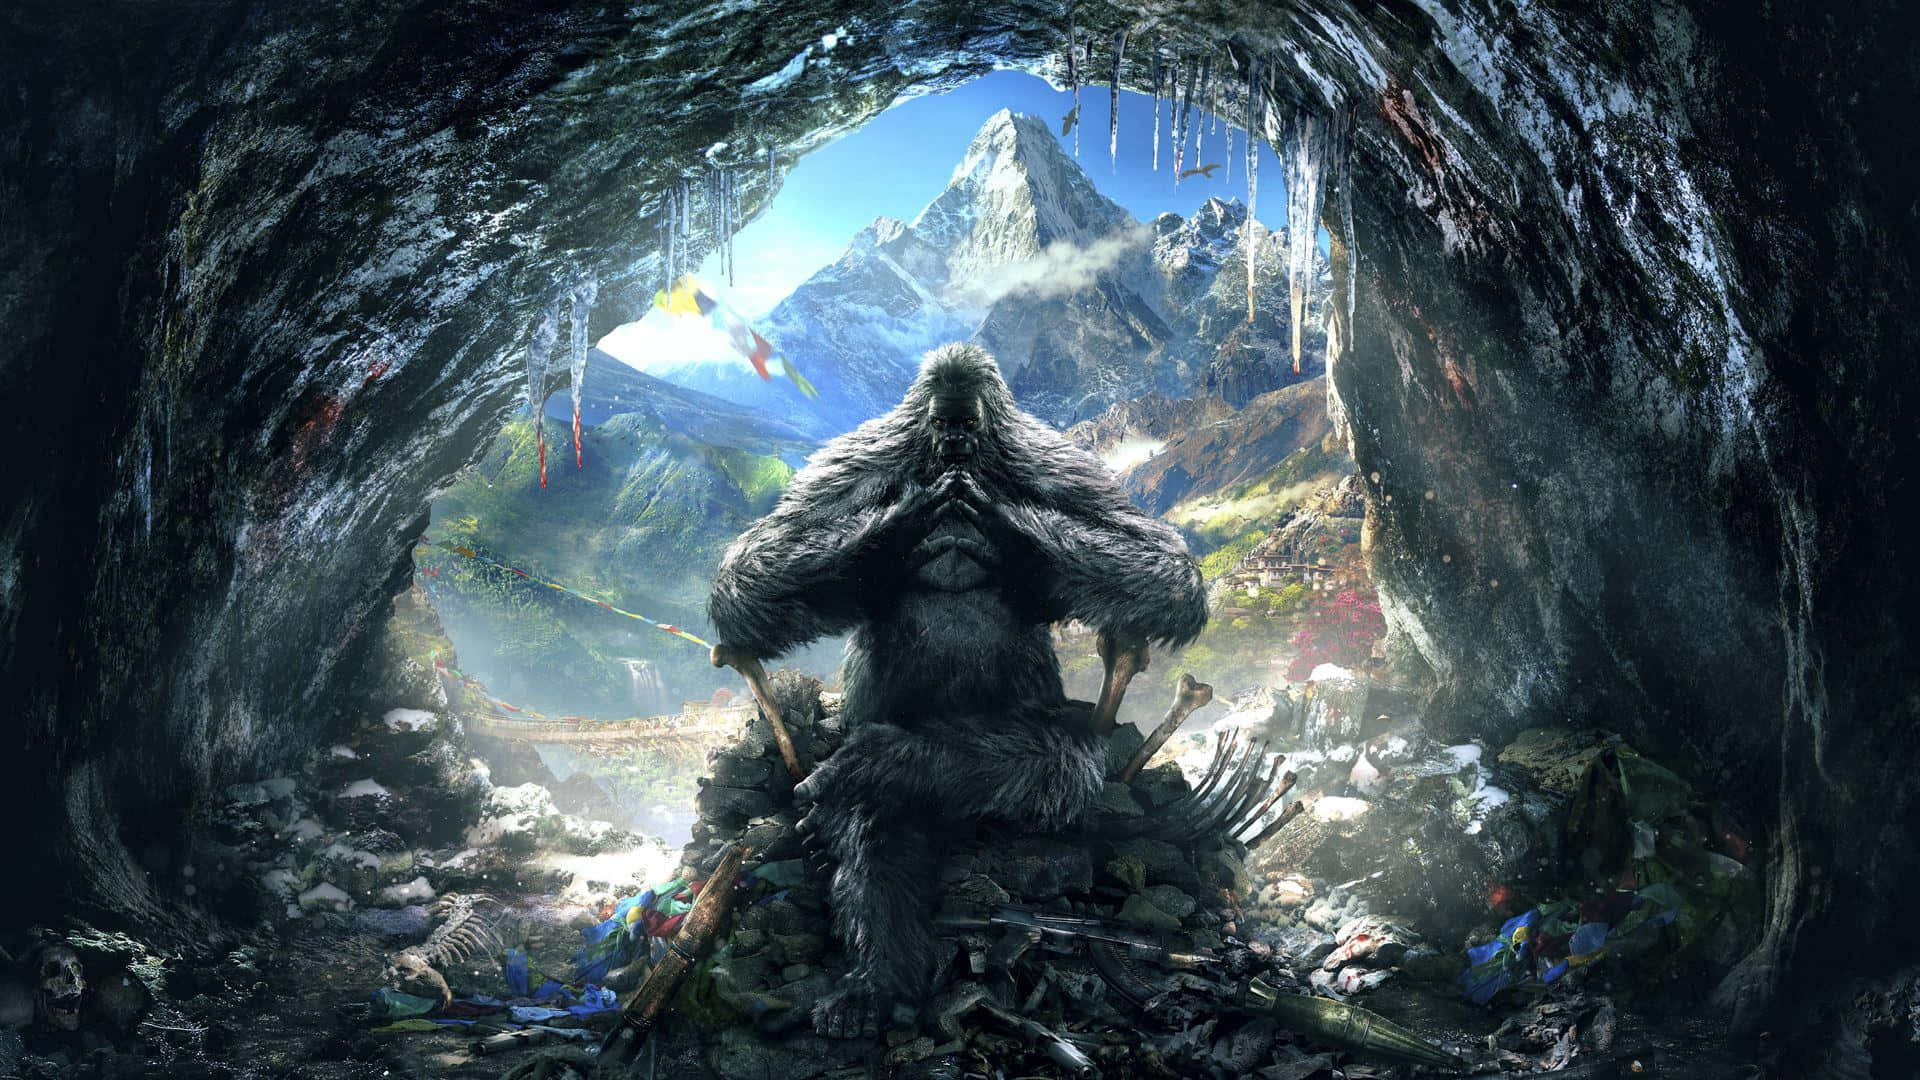 A Man Is Sitting In A Cave With A Mountain In The Background